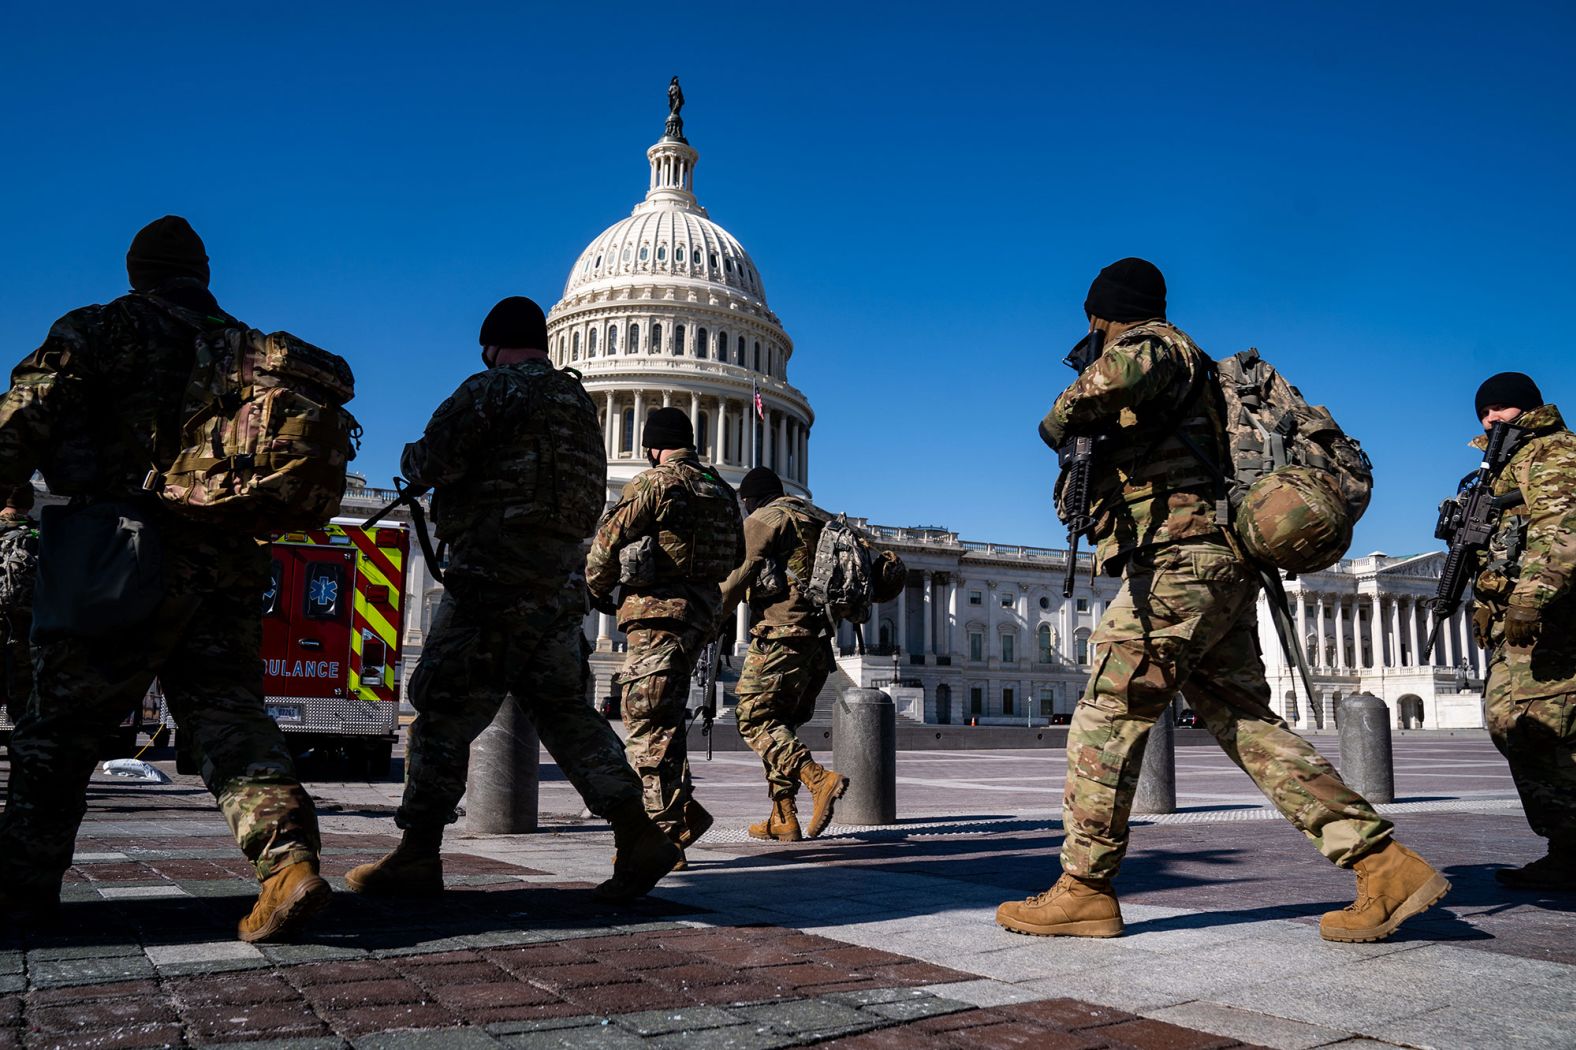 National Guard members walk near the Capitol on Monday, February 8.